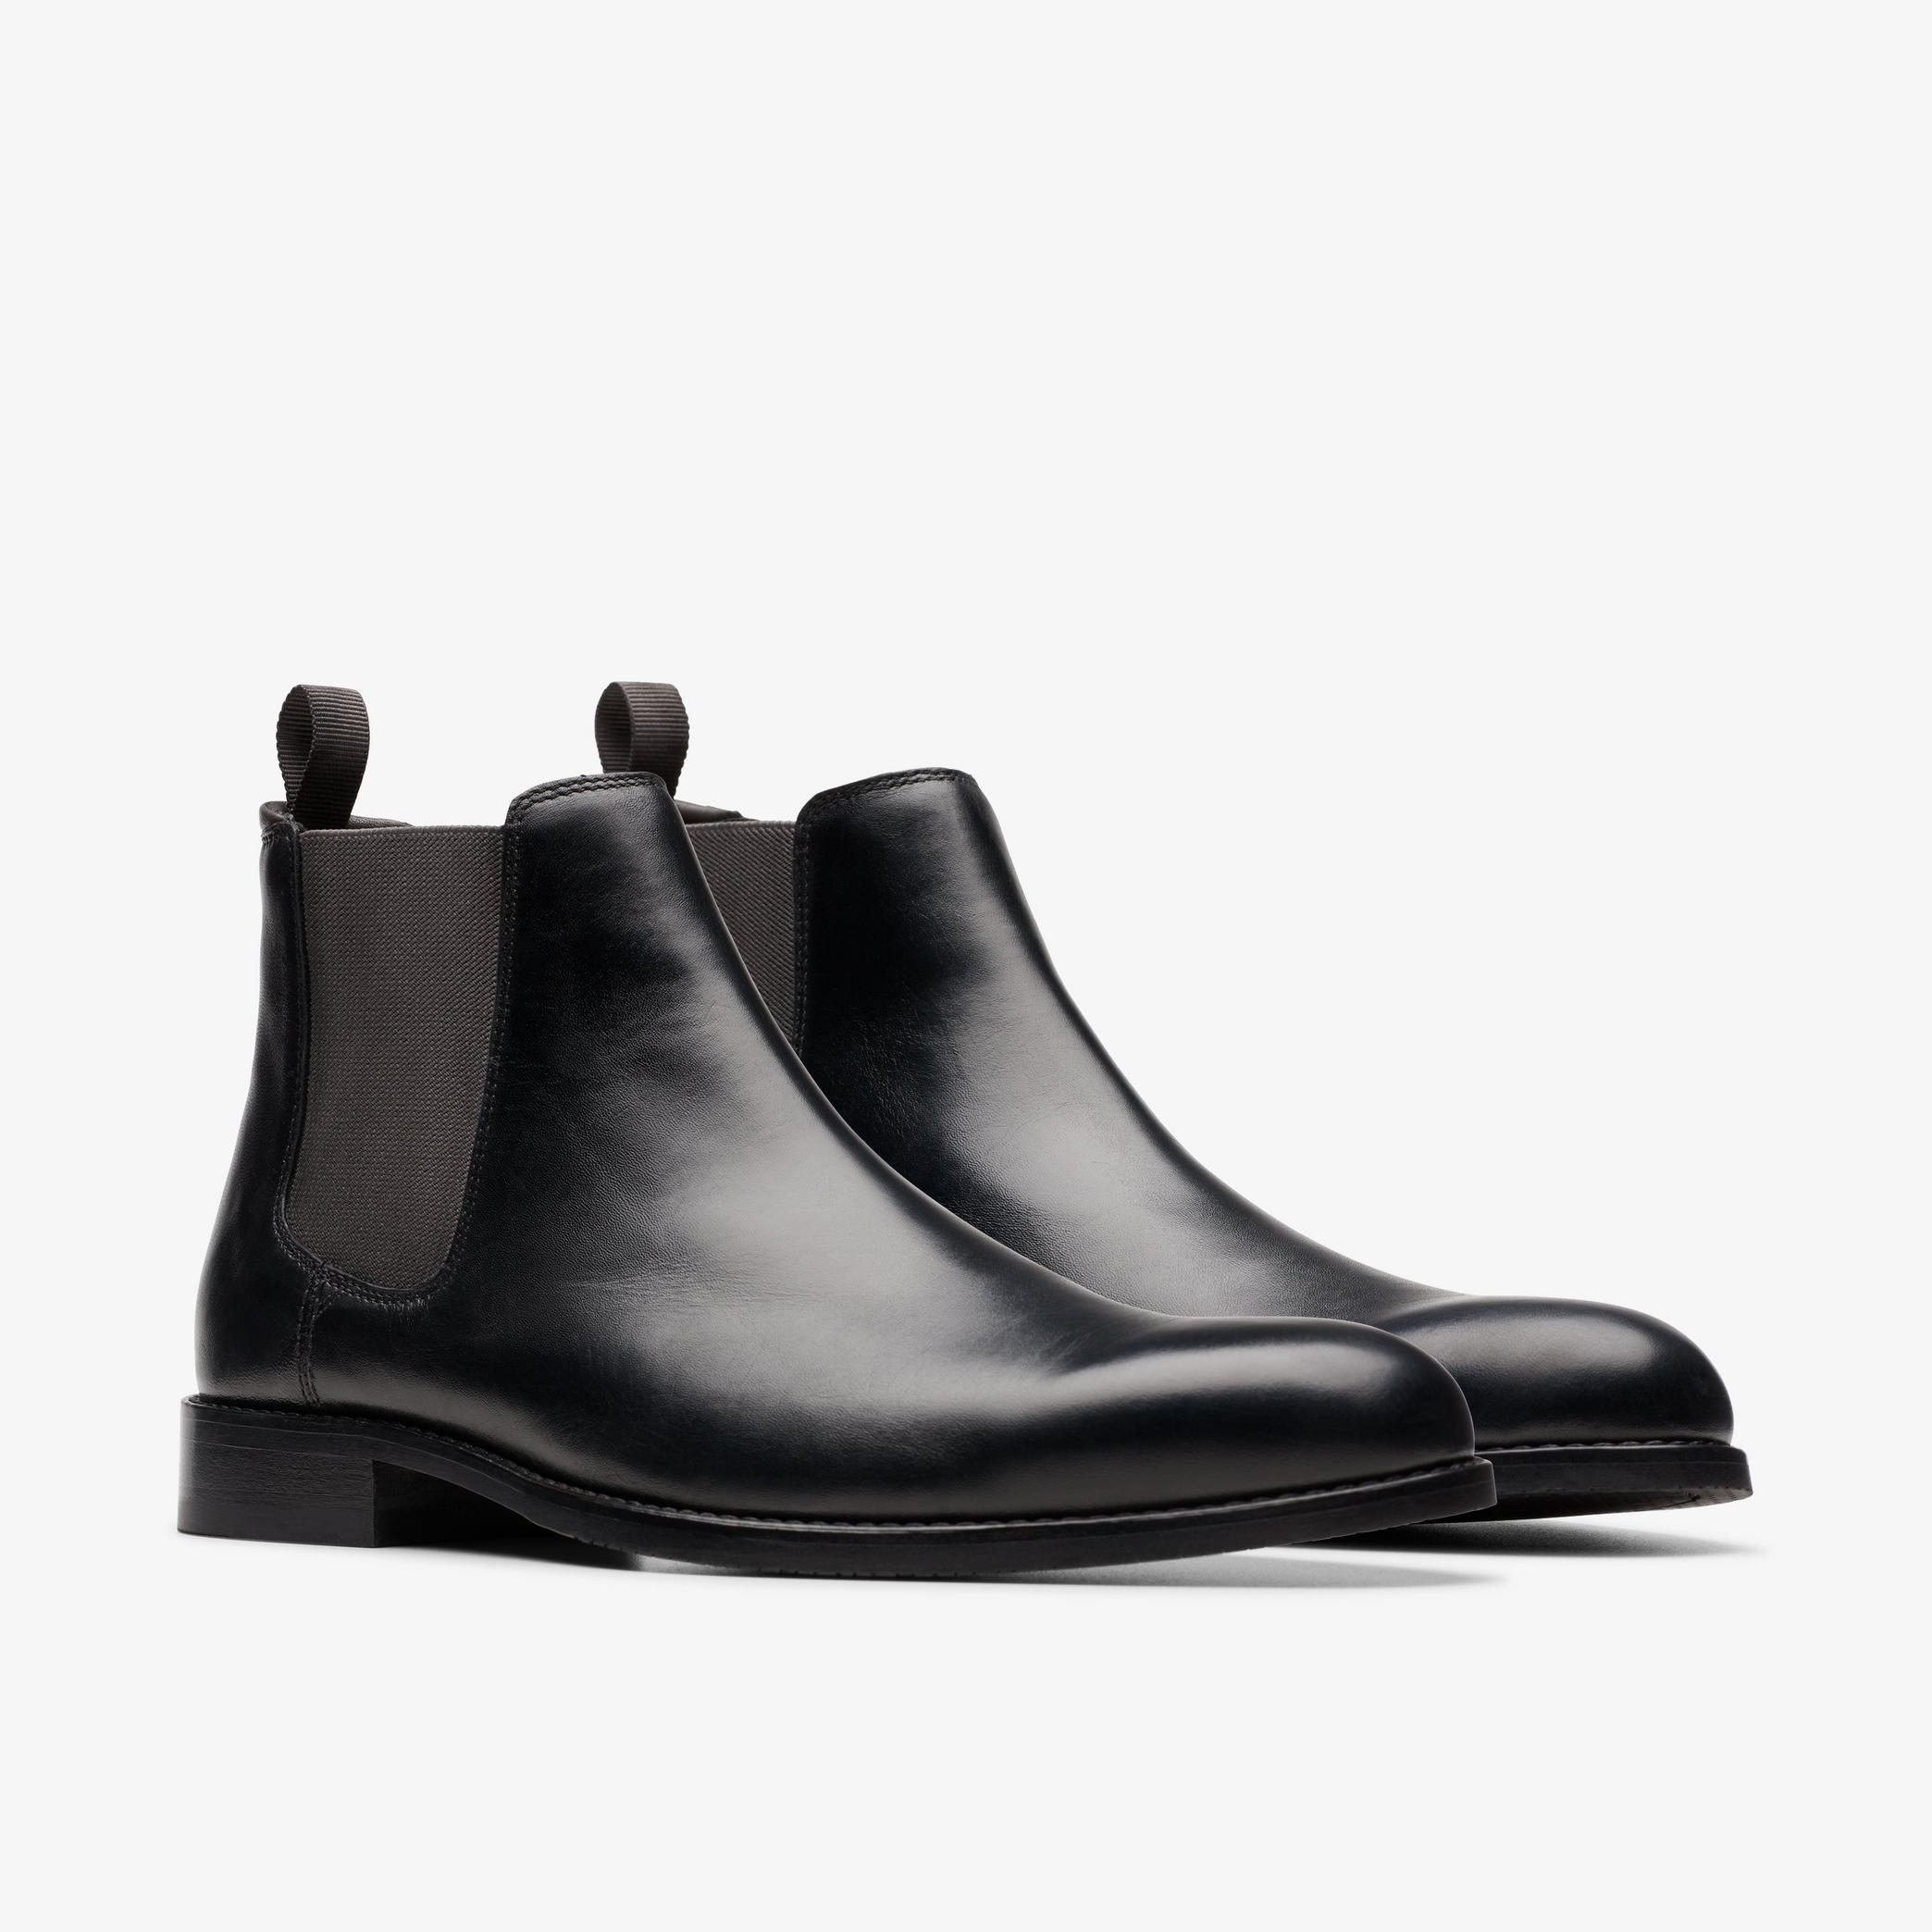 Craft Arlo Top Black Leather Boots, view 5 of 7